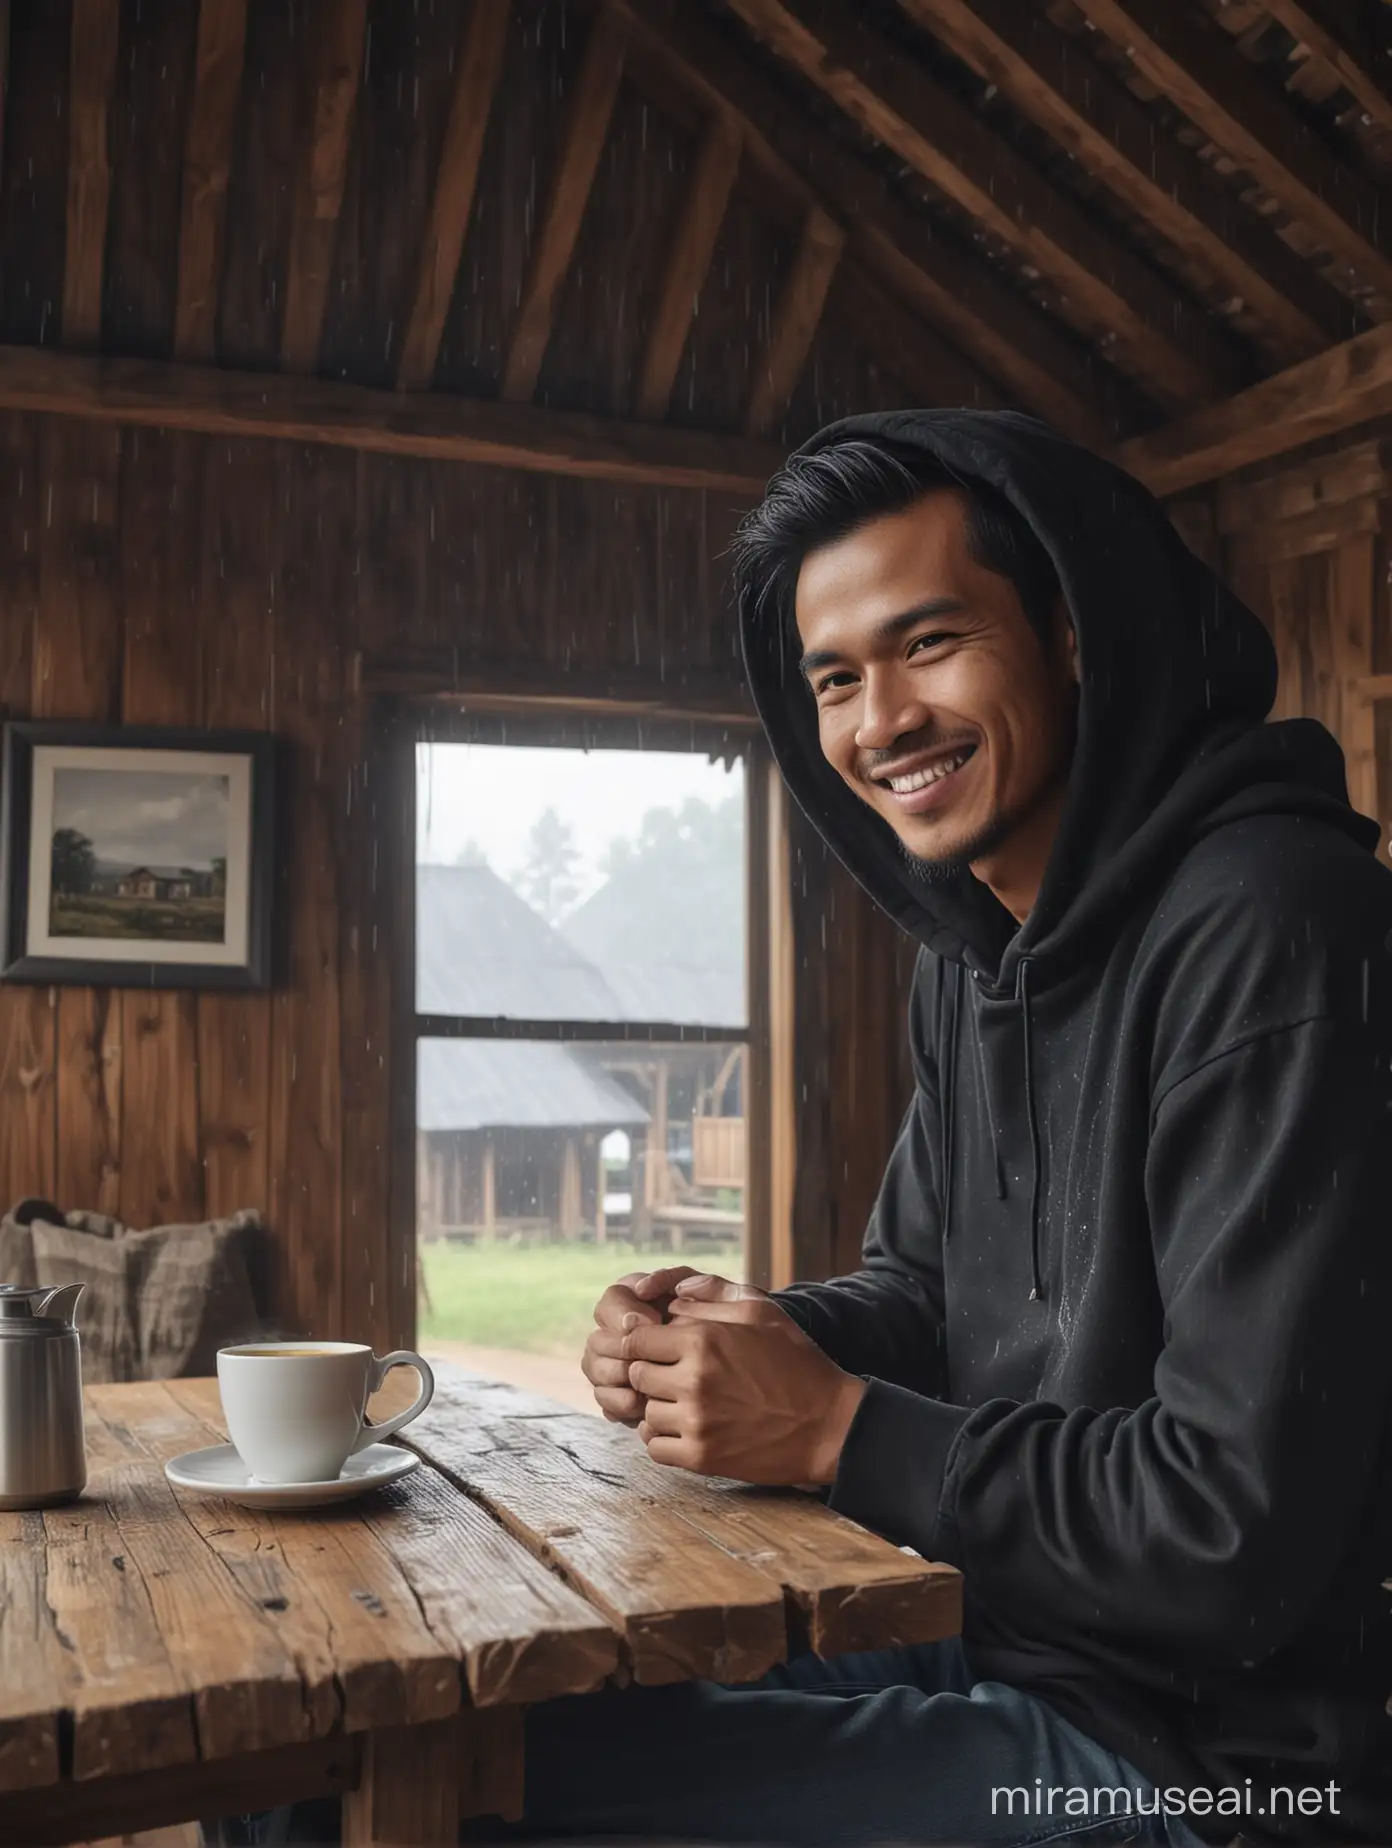 Indonesian Man Smiling with Coffee in Rustic Wooden House on Rainy Morning